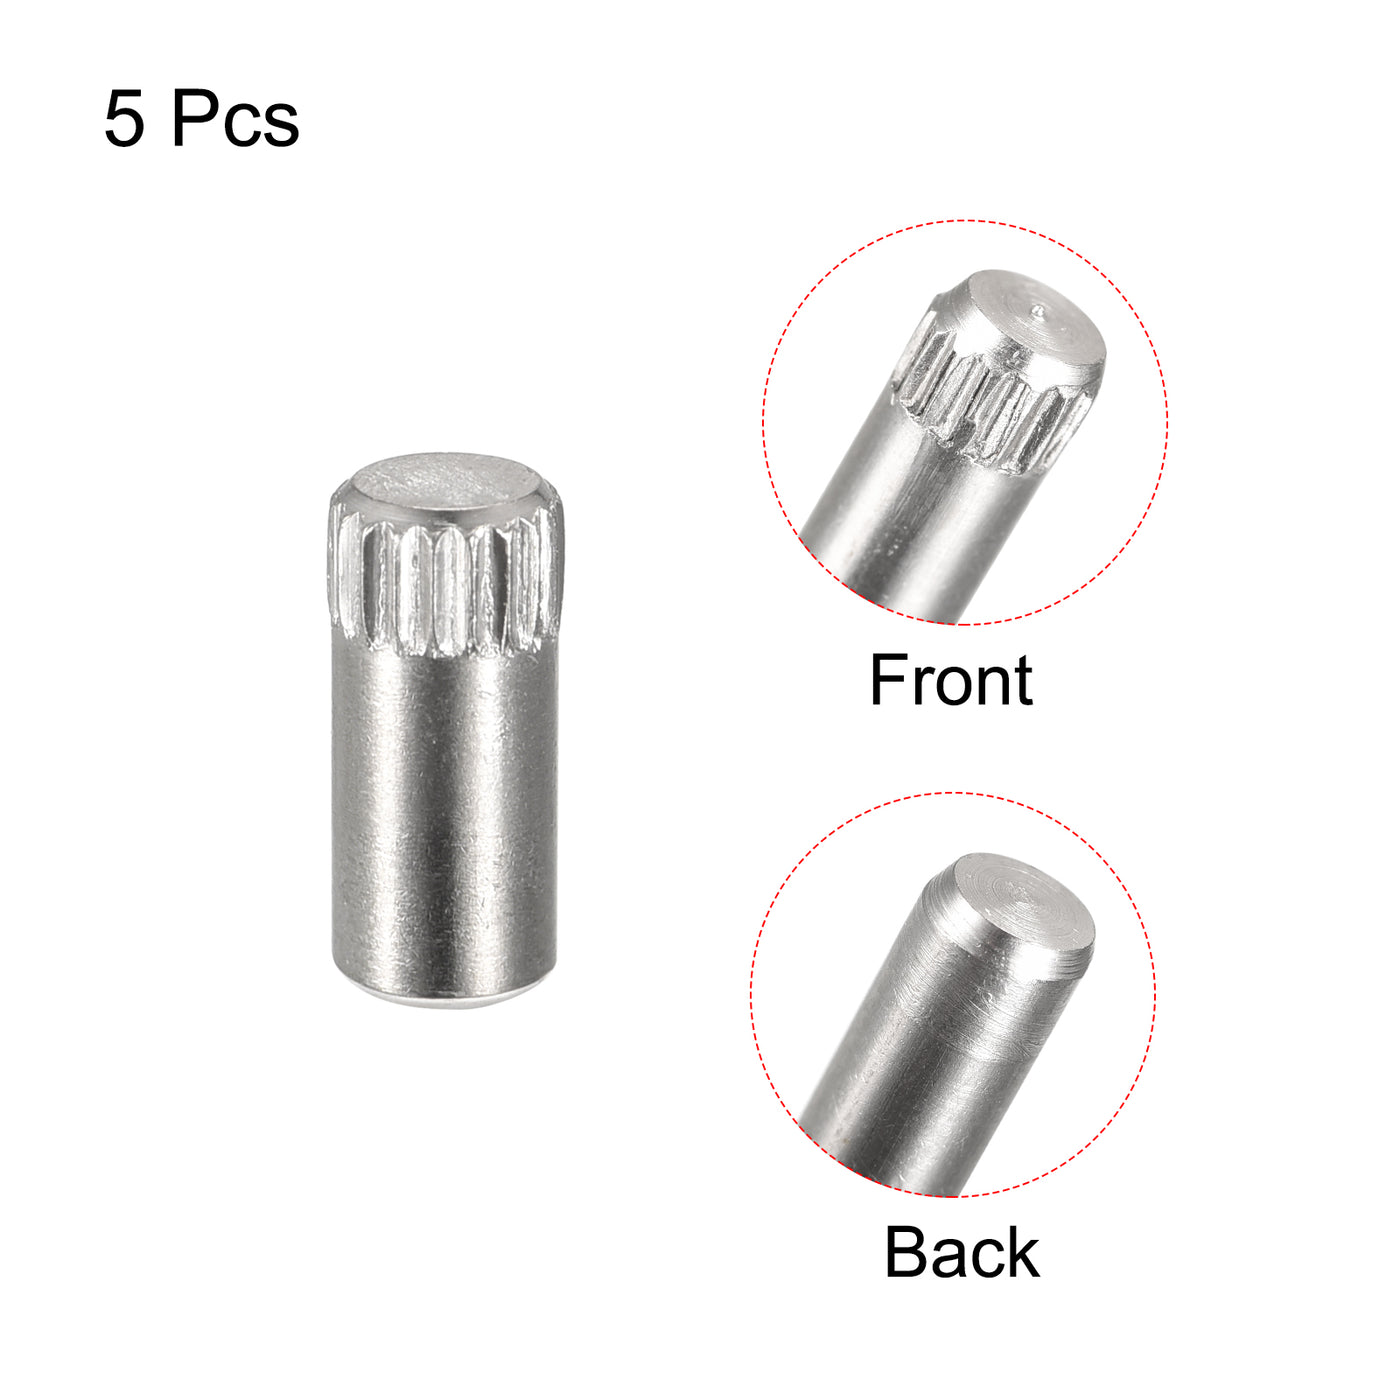 uxcell Uxcell 5x10mm 304 Stainless Steel Dowel Pins, 5Pcs Knurled Head Flat End Dowel Pin